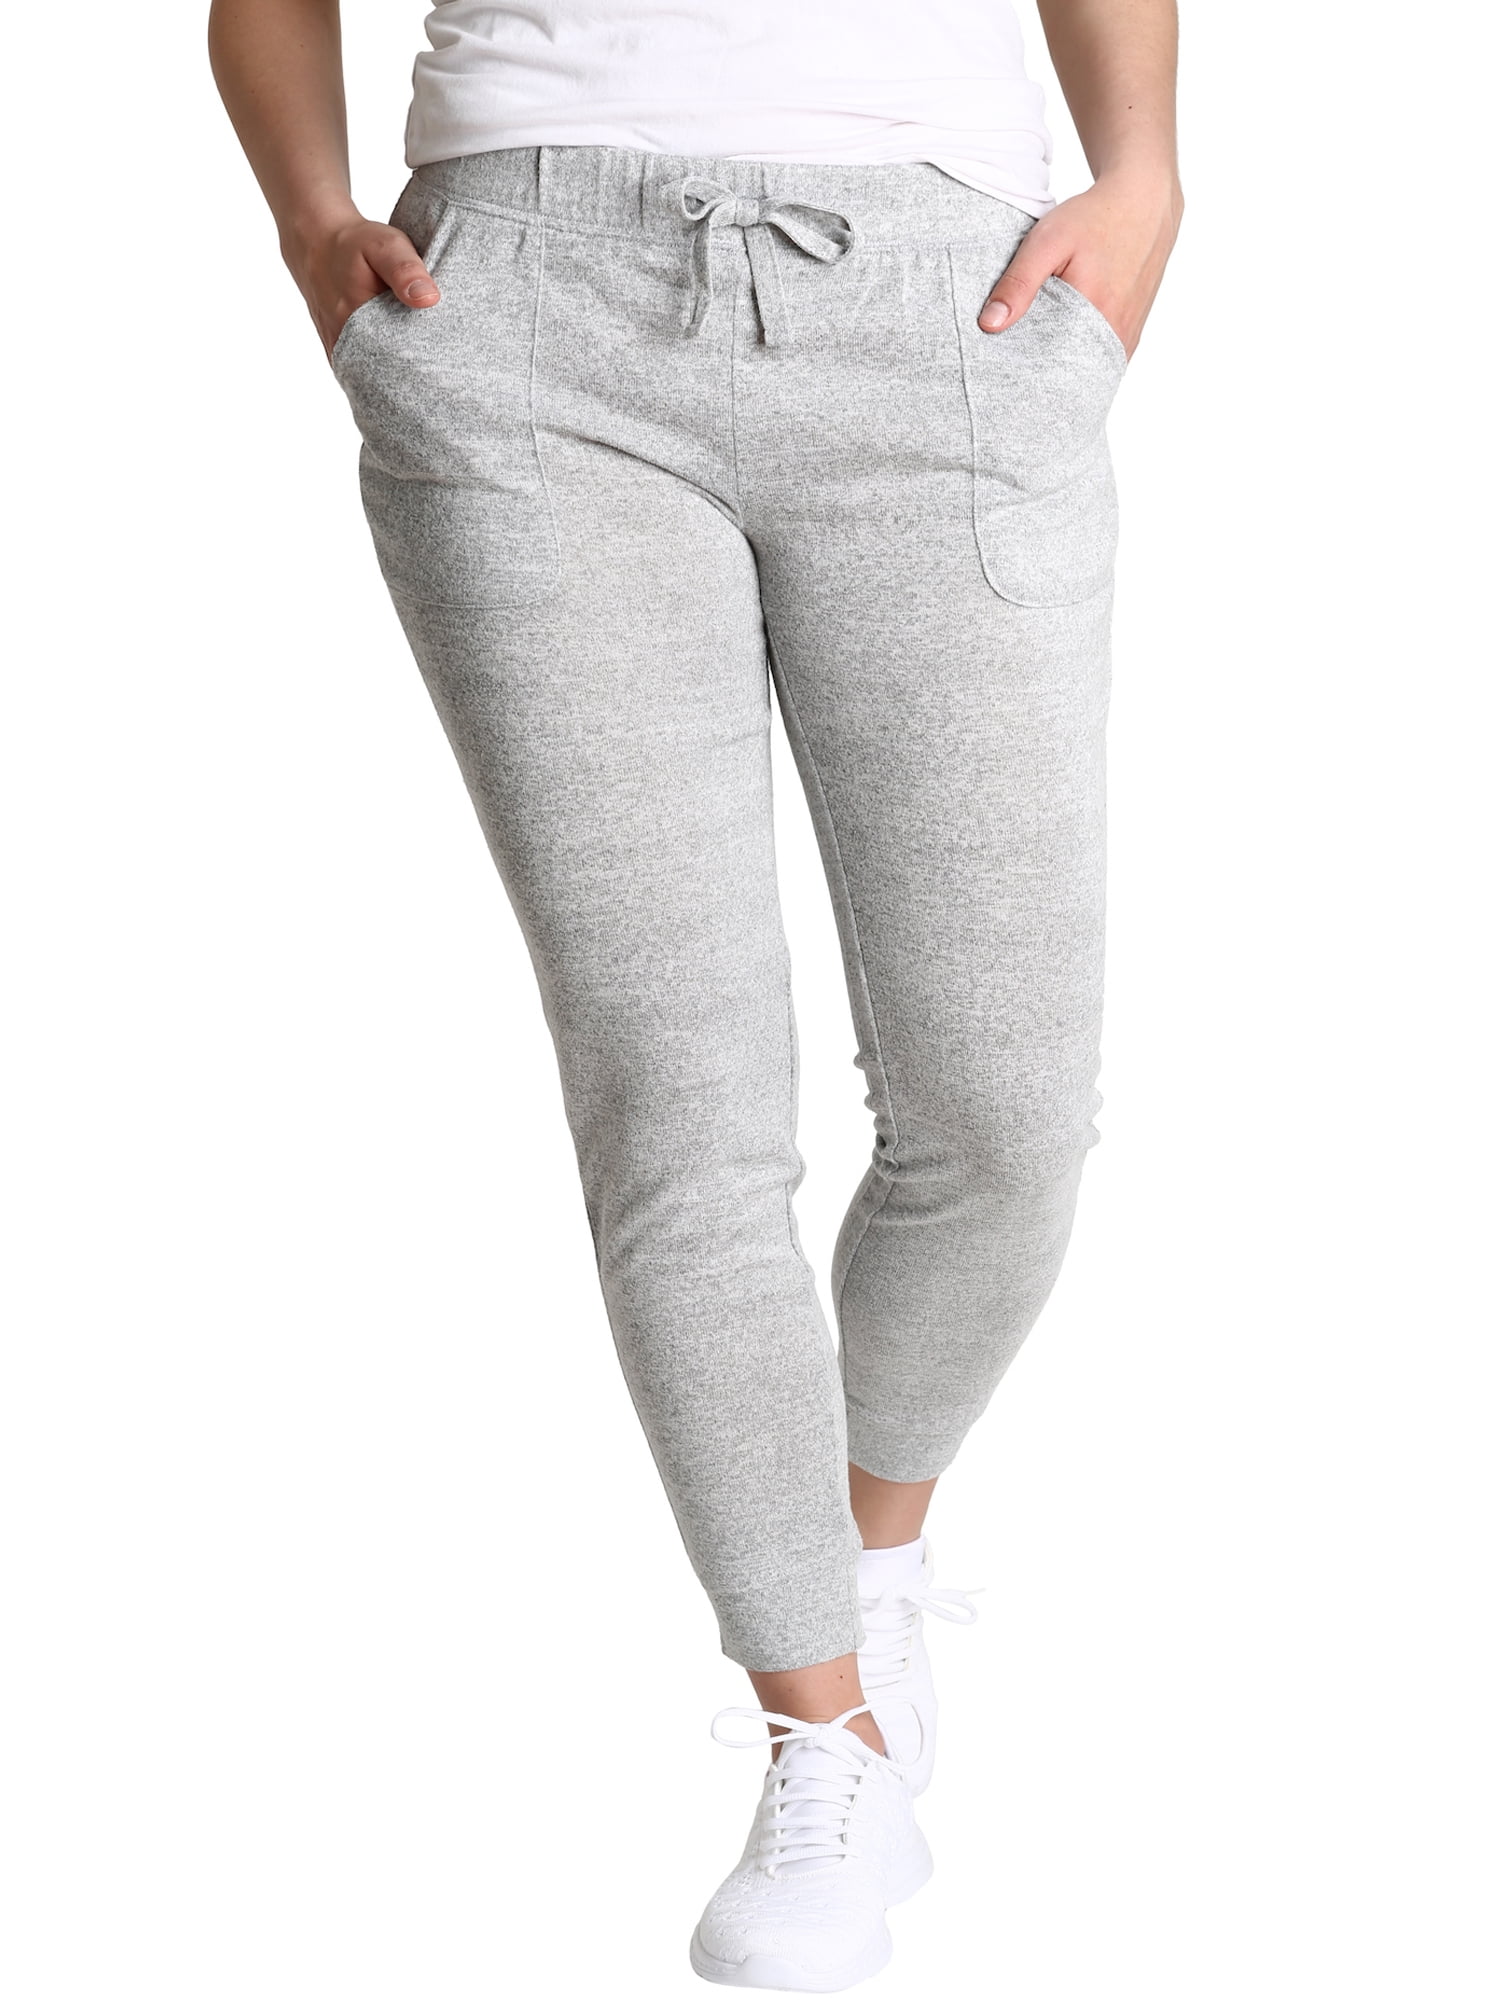 Blis Women's Tapered Sweatpant Lounge Jogger with Patch Pockets ...